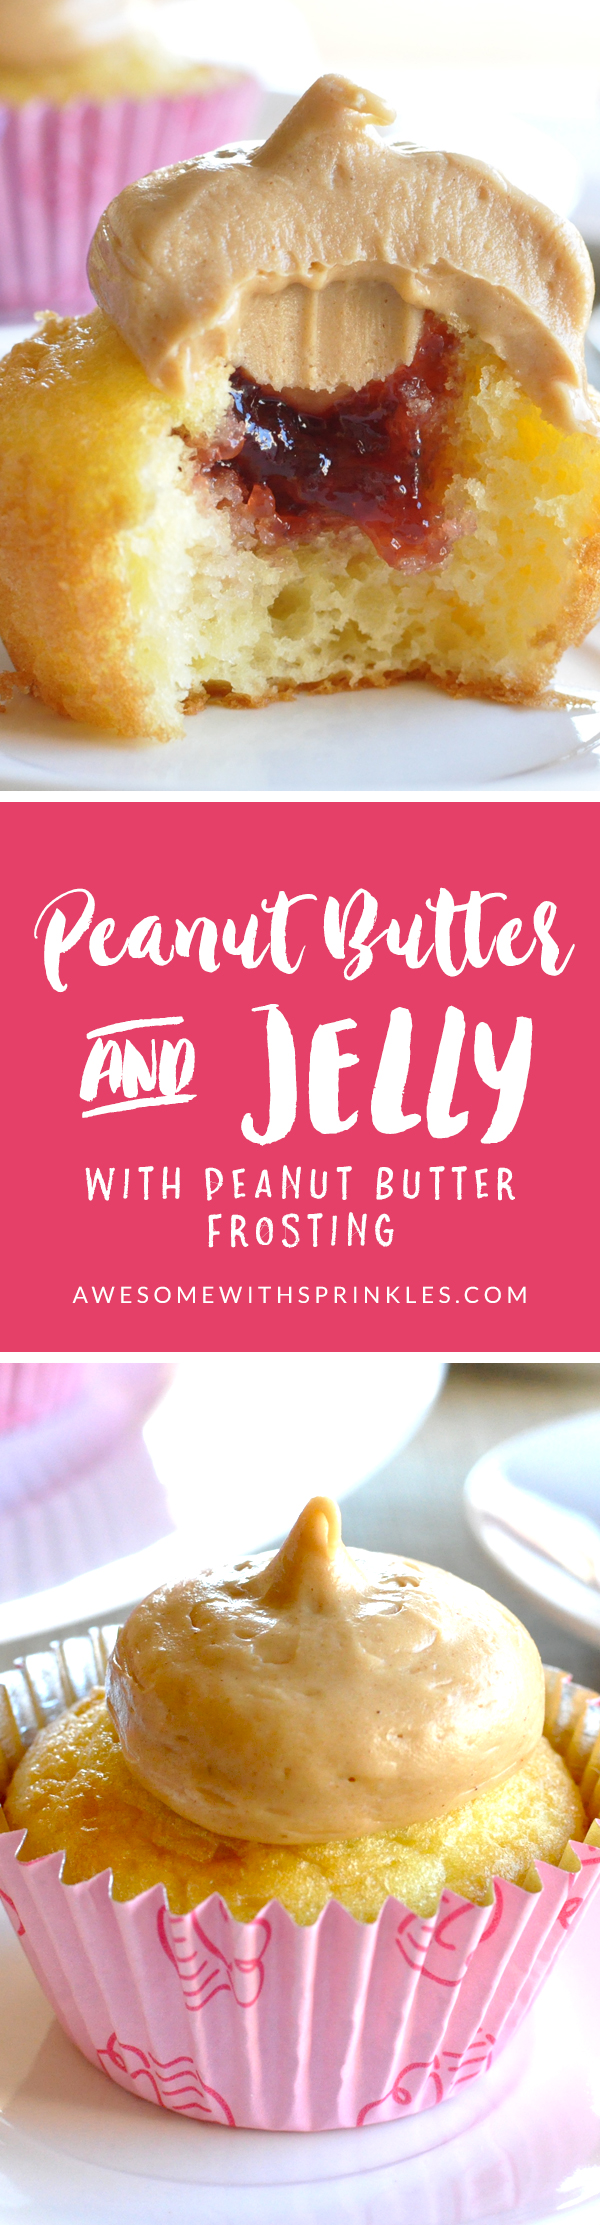 Peanut Butter & Jelly Cupcakes | Awesome with Sprinkles